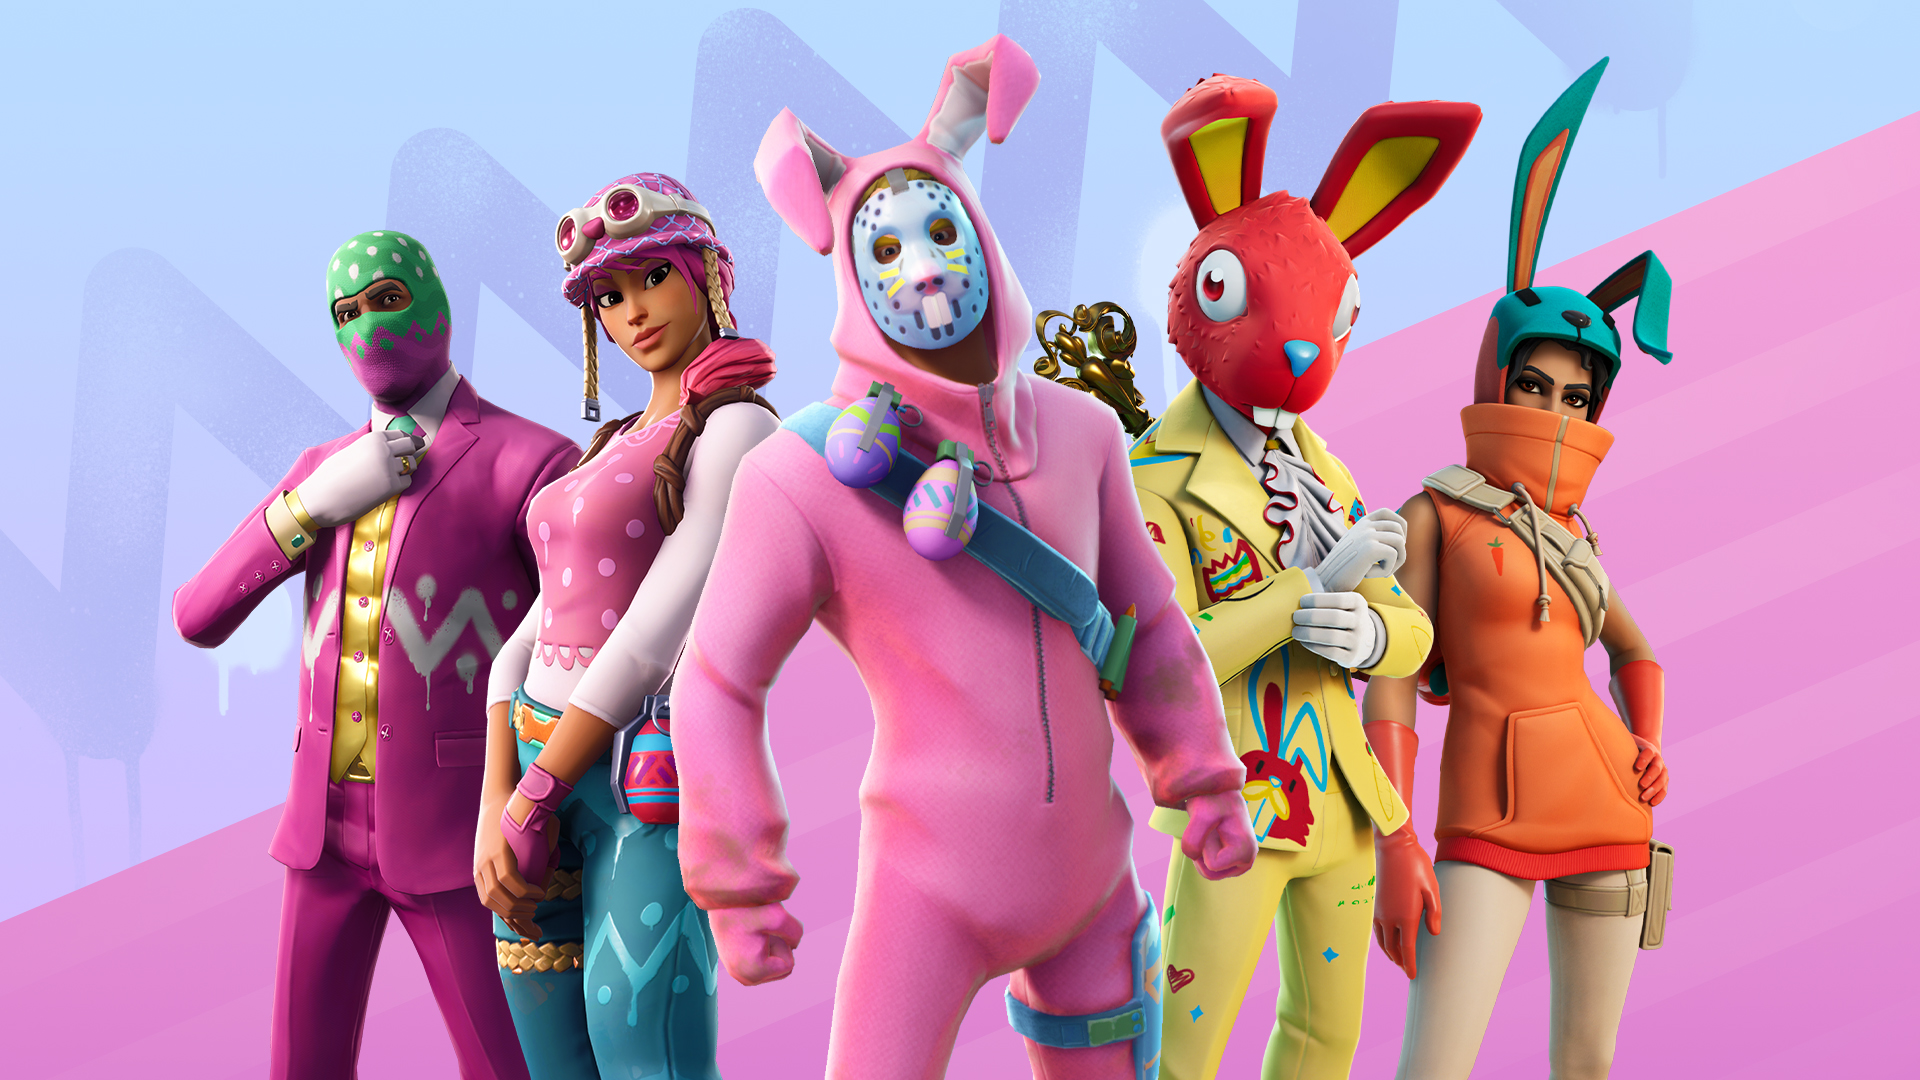 Current Fortnite Item Shop - Daily and Featured Items